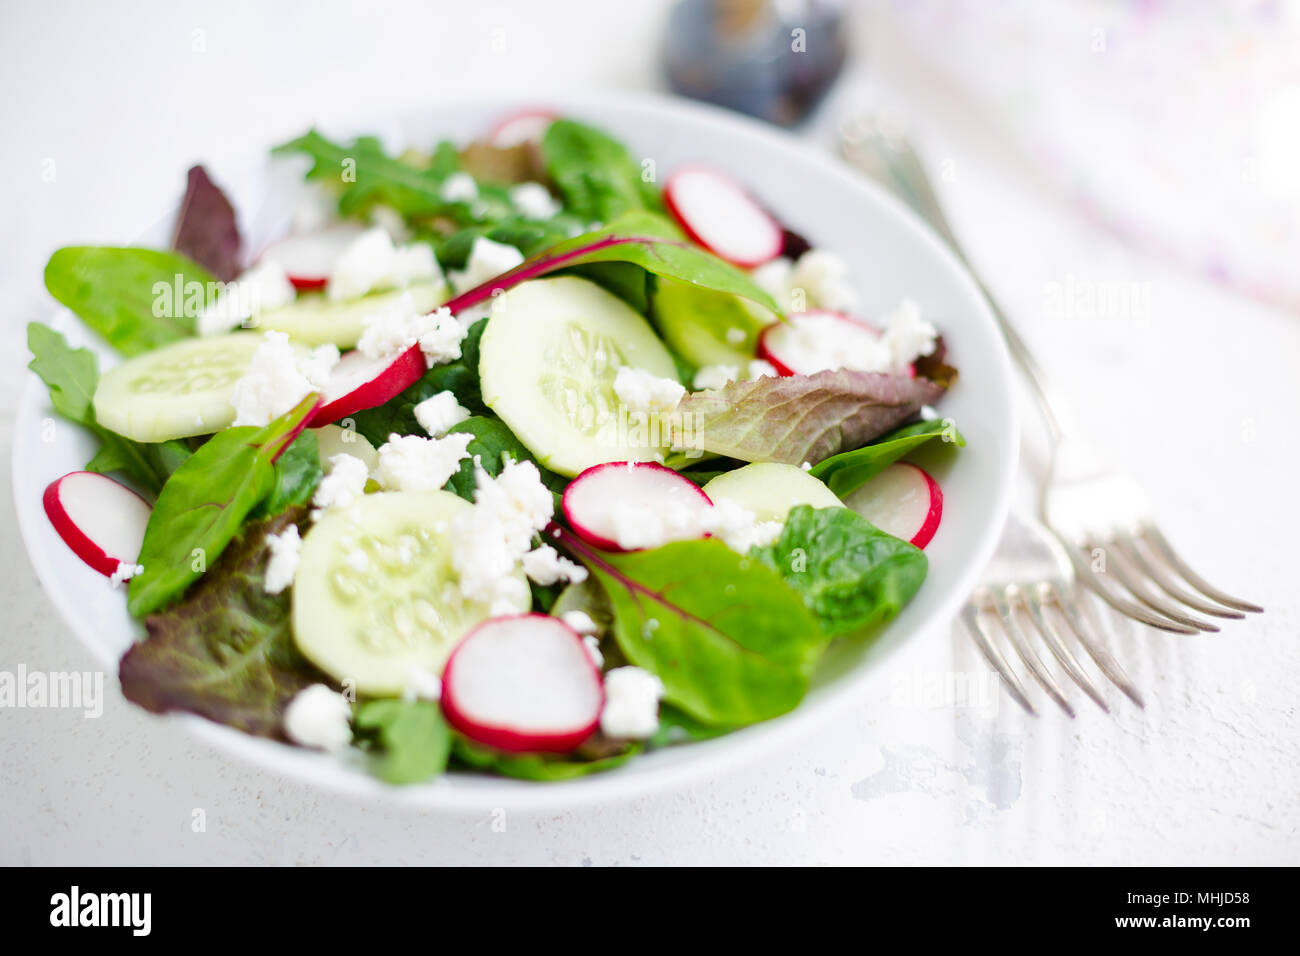 Mixed salad with baby leaves of red lettuce, tatsoi, arugula, red chard, radish, cucumber and feta cheese with olive oil and balsamic vinegar dressing Stock Photo